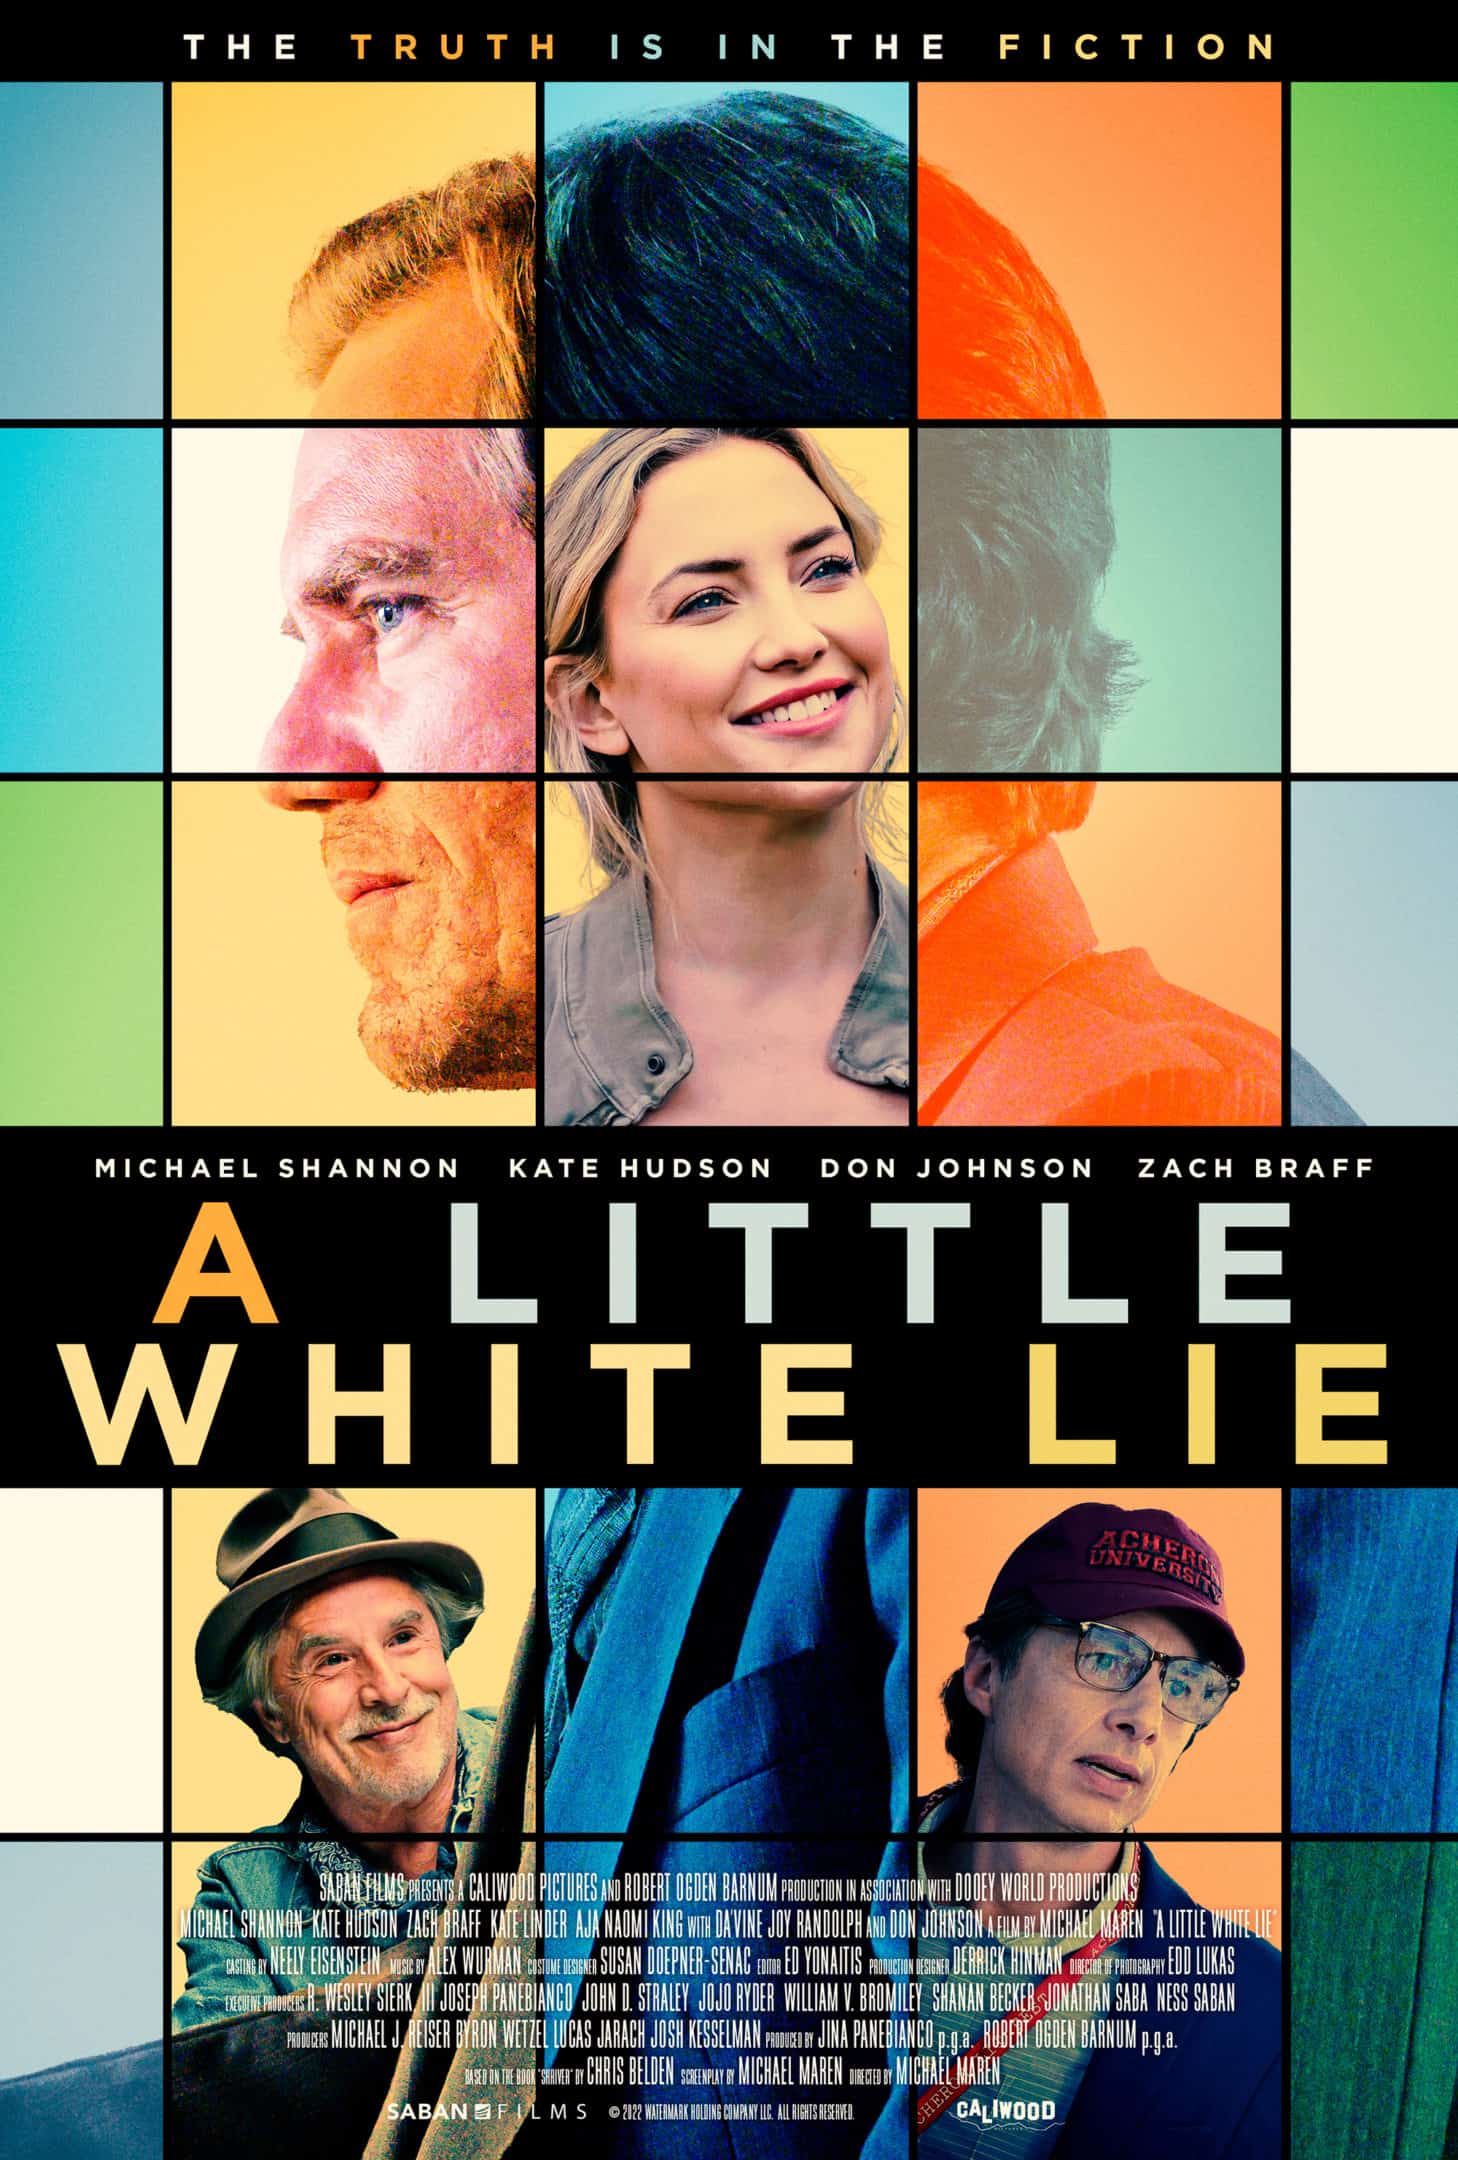 A Little White Lie lands a trailer and poster - IN THEATERS and VOD March 3rd 18